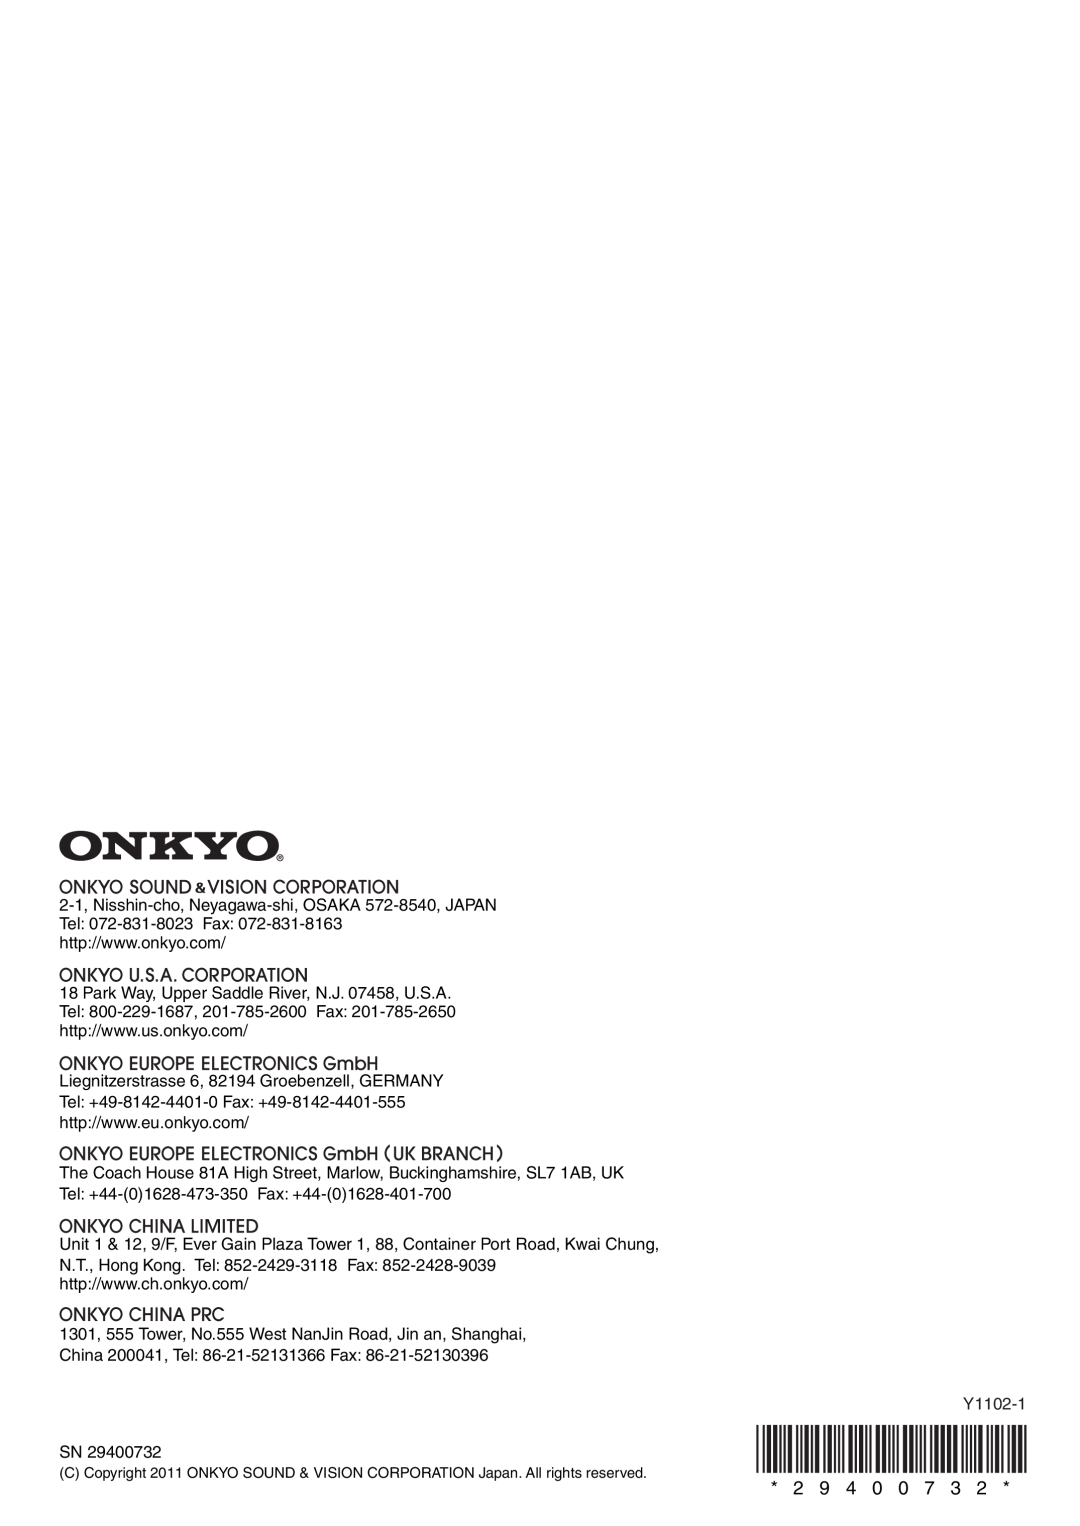 Onkyo HT-RC370 instruction manual 2 9 4 0 0 7, Liegnitzerstrasse 6, 82194 Groebenzell, GERMANY 